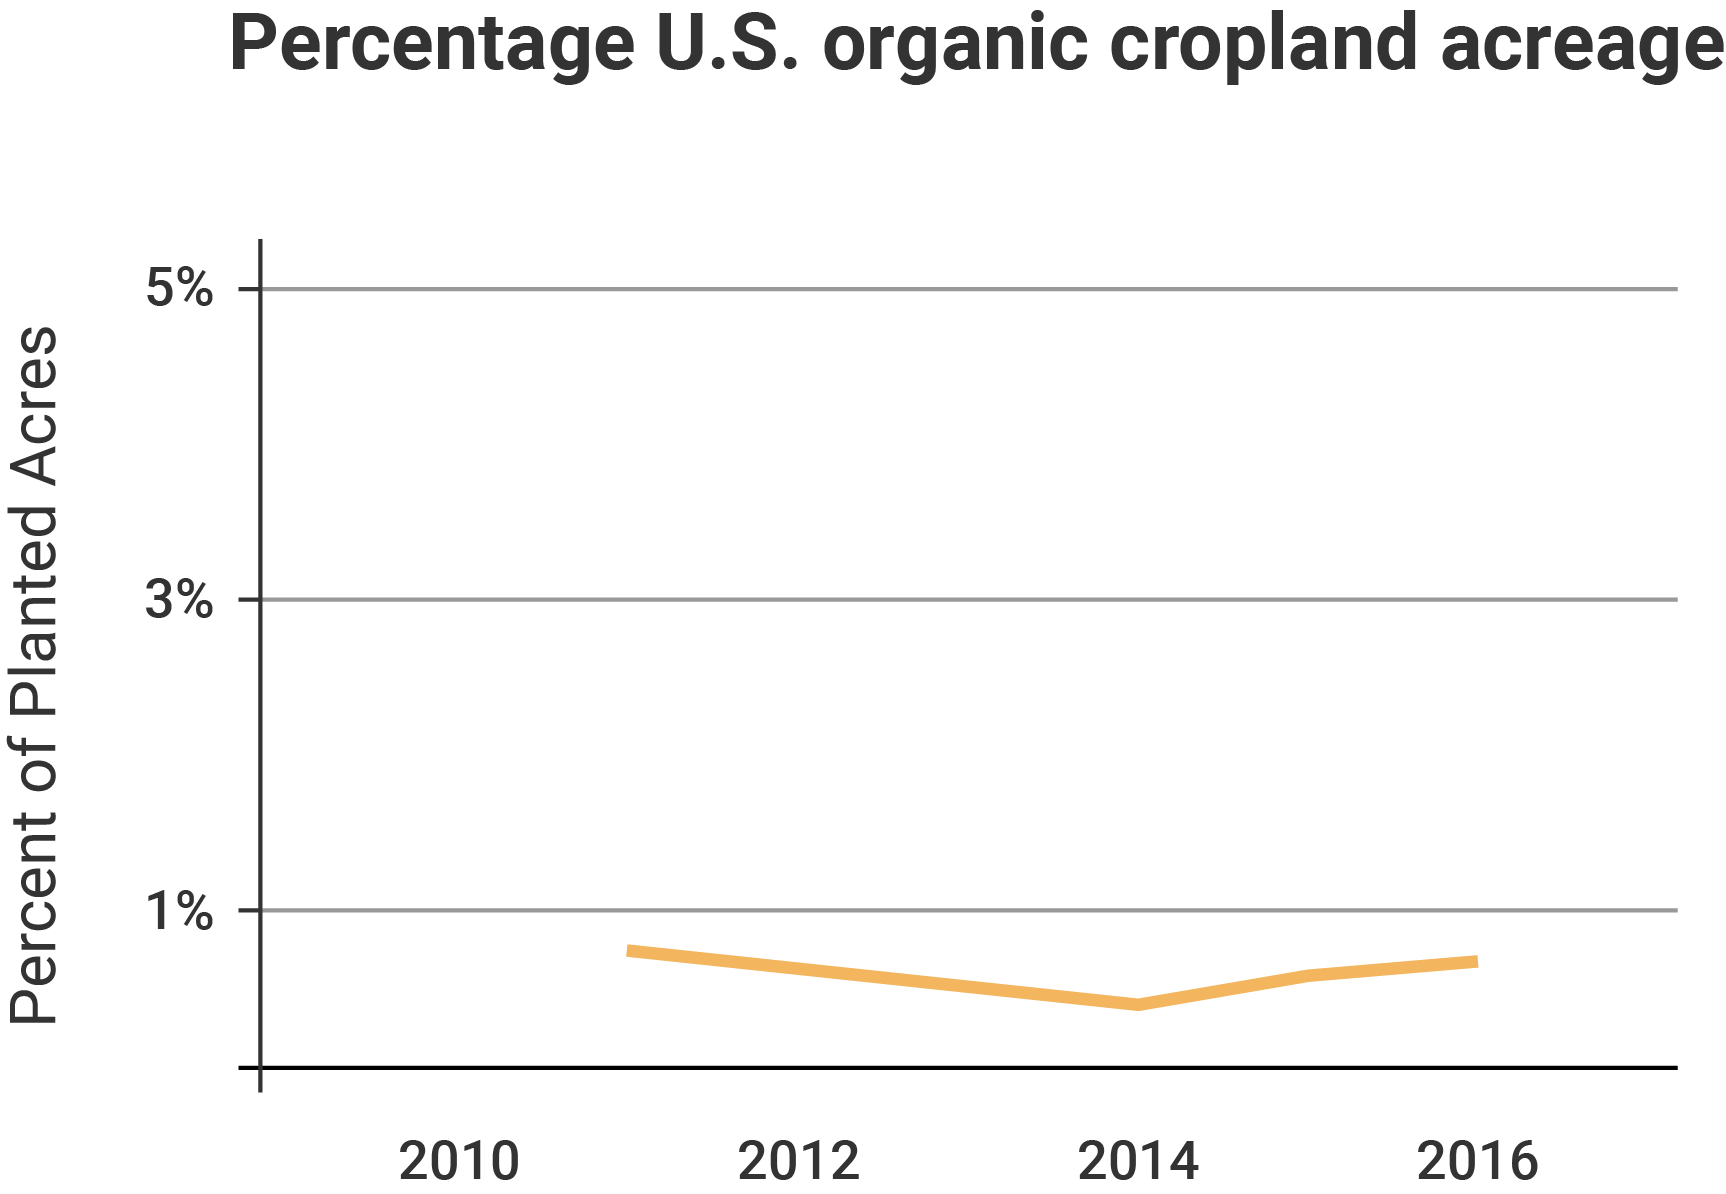 Percentage of U.S. organic cropland acreage from 2011 to 2016.